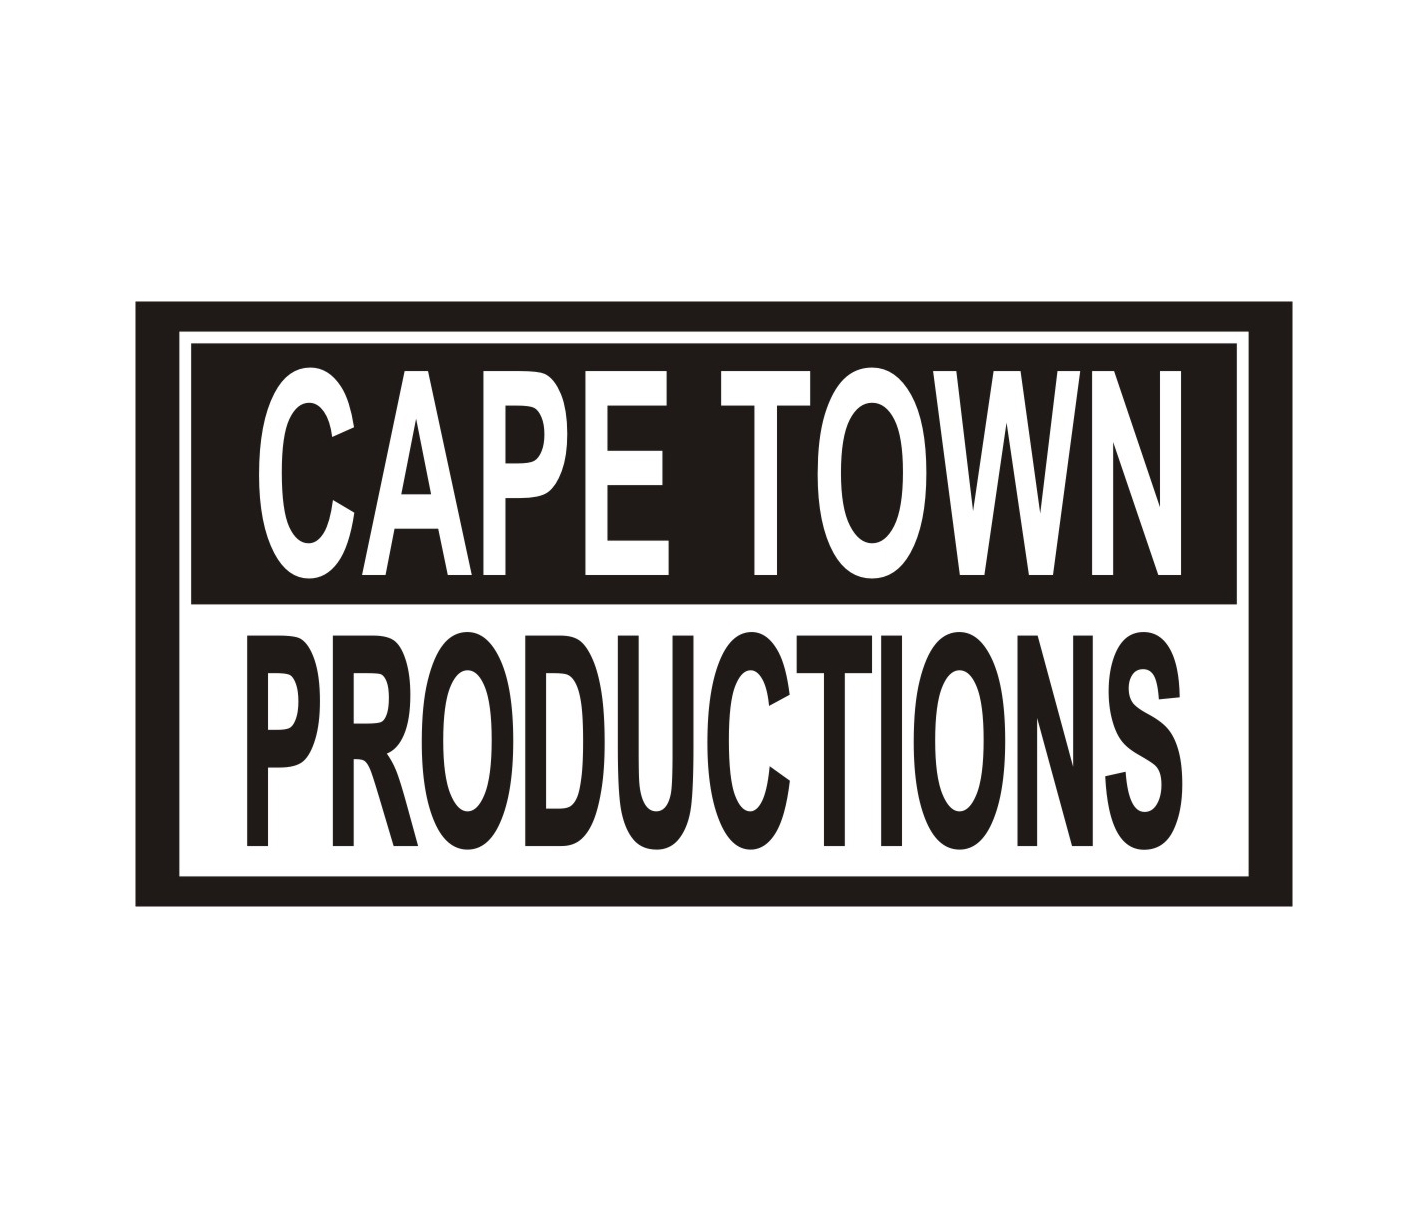 Cape Town Productions